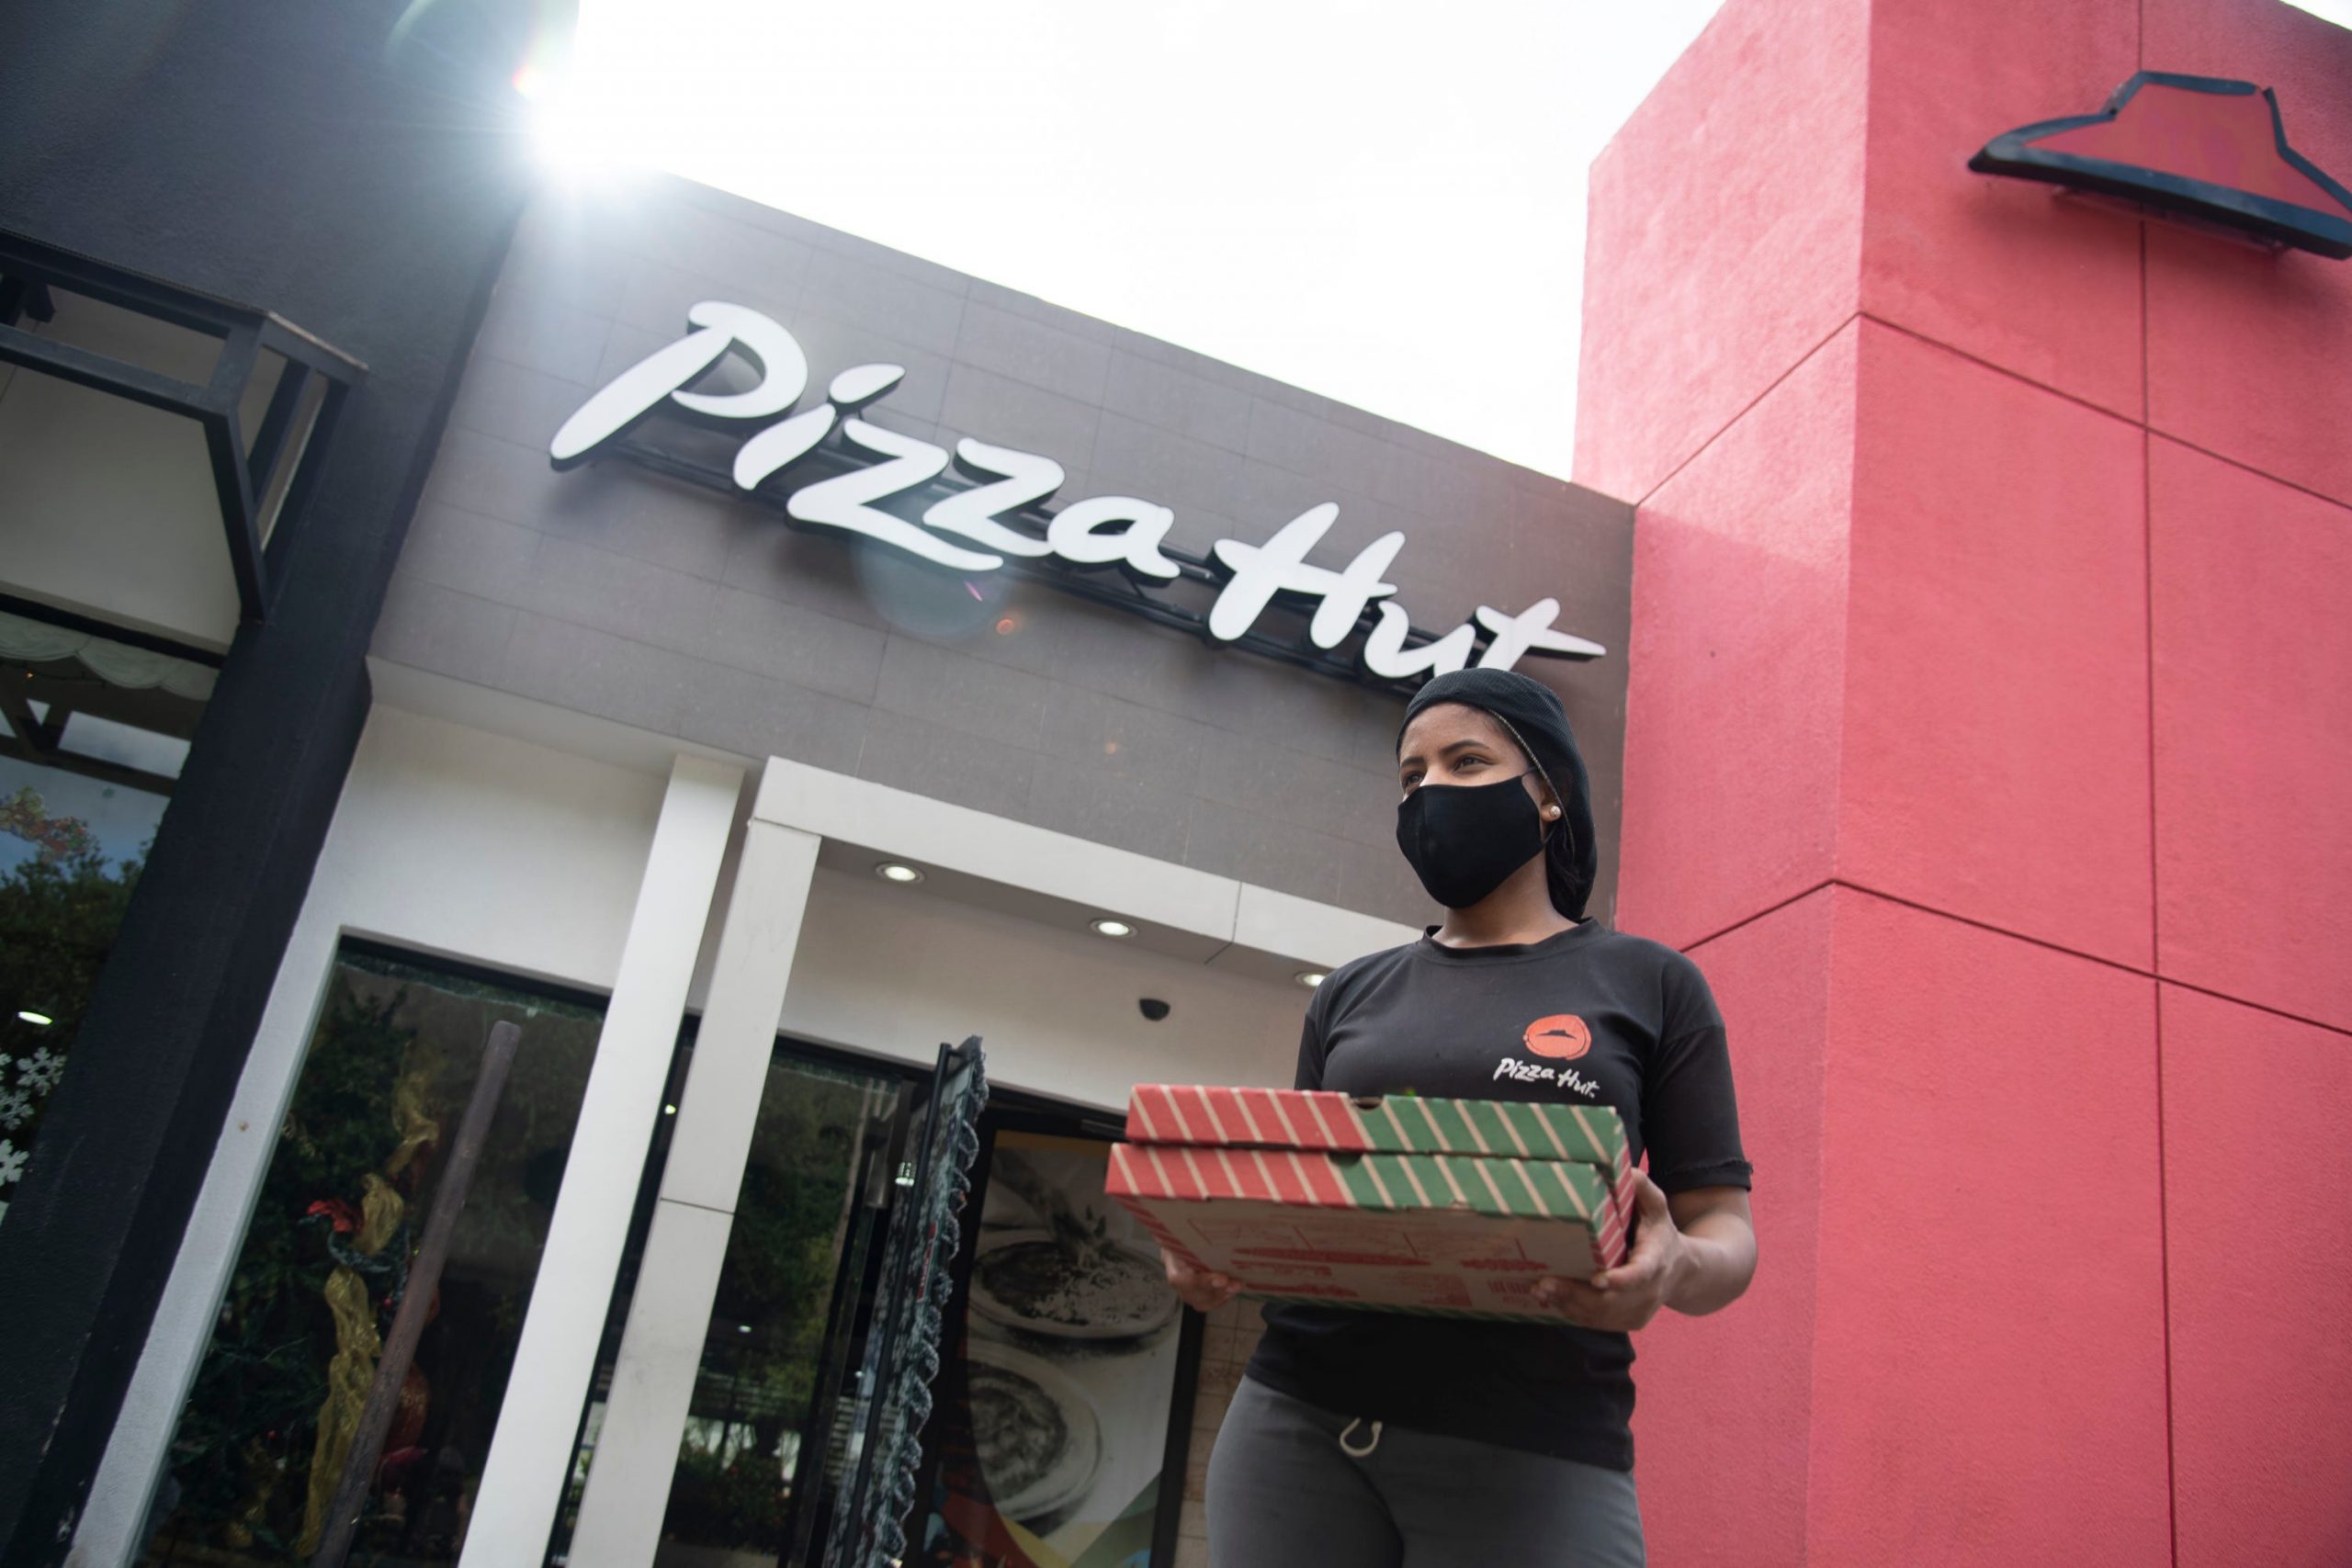 A Pizza Hut employee walks out of a restaurant with a black and red facade carrying two pizza boxes.